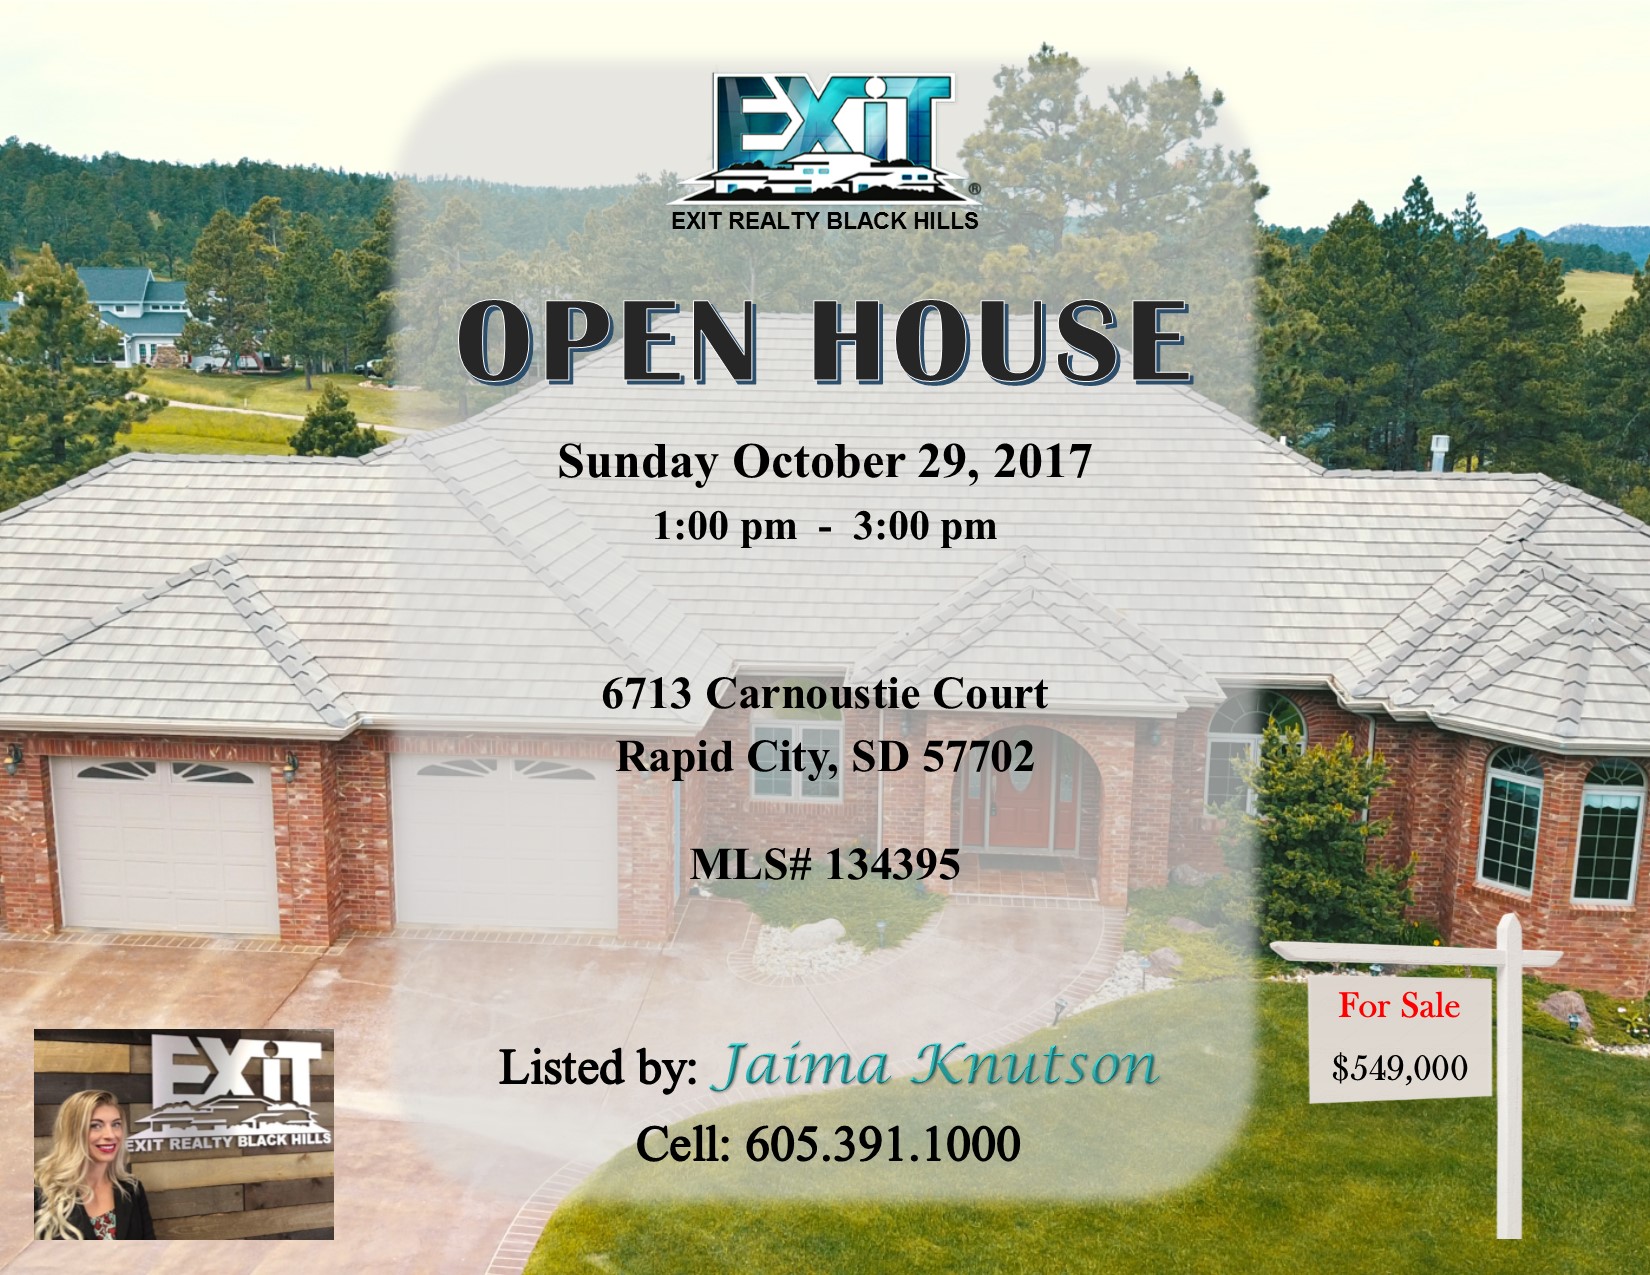 OPEN HOUSE October 29, 2017